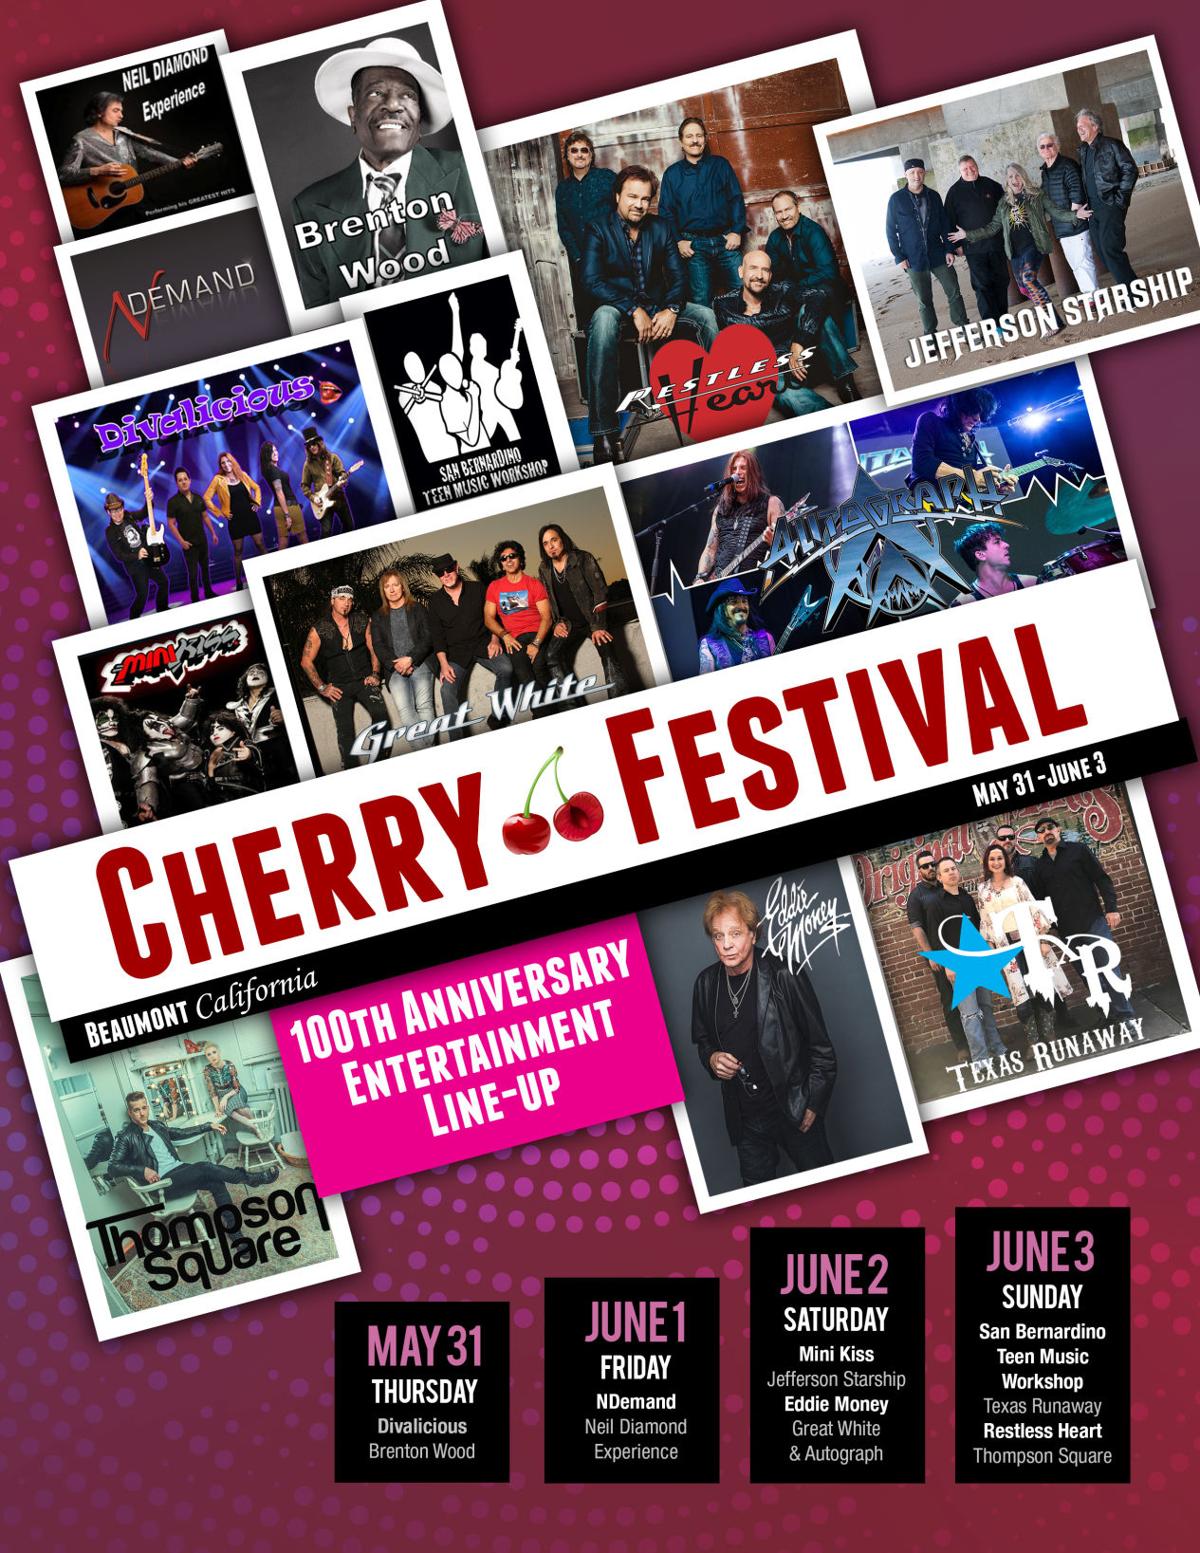 Cherry Festival entertainment lineup announced for 2018